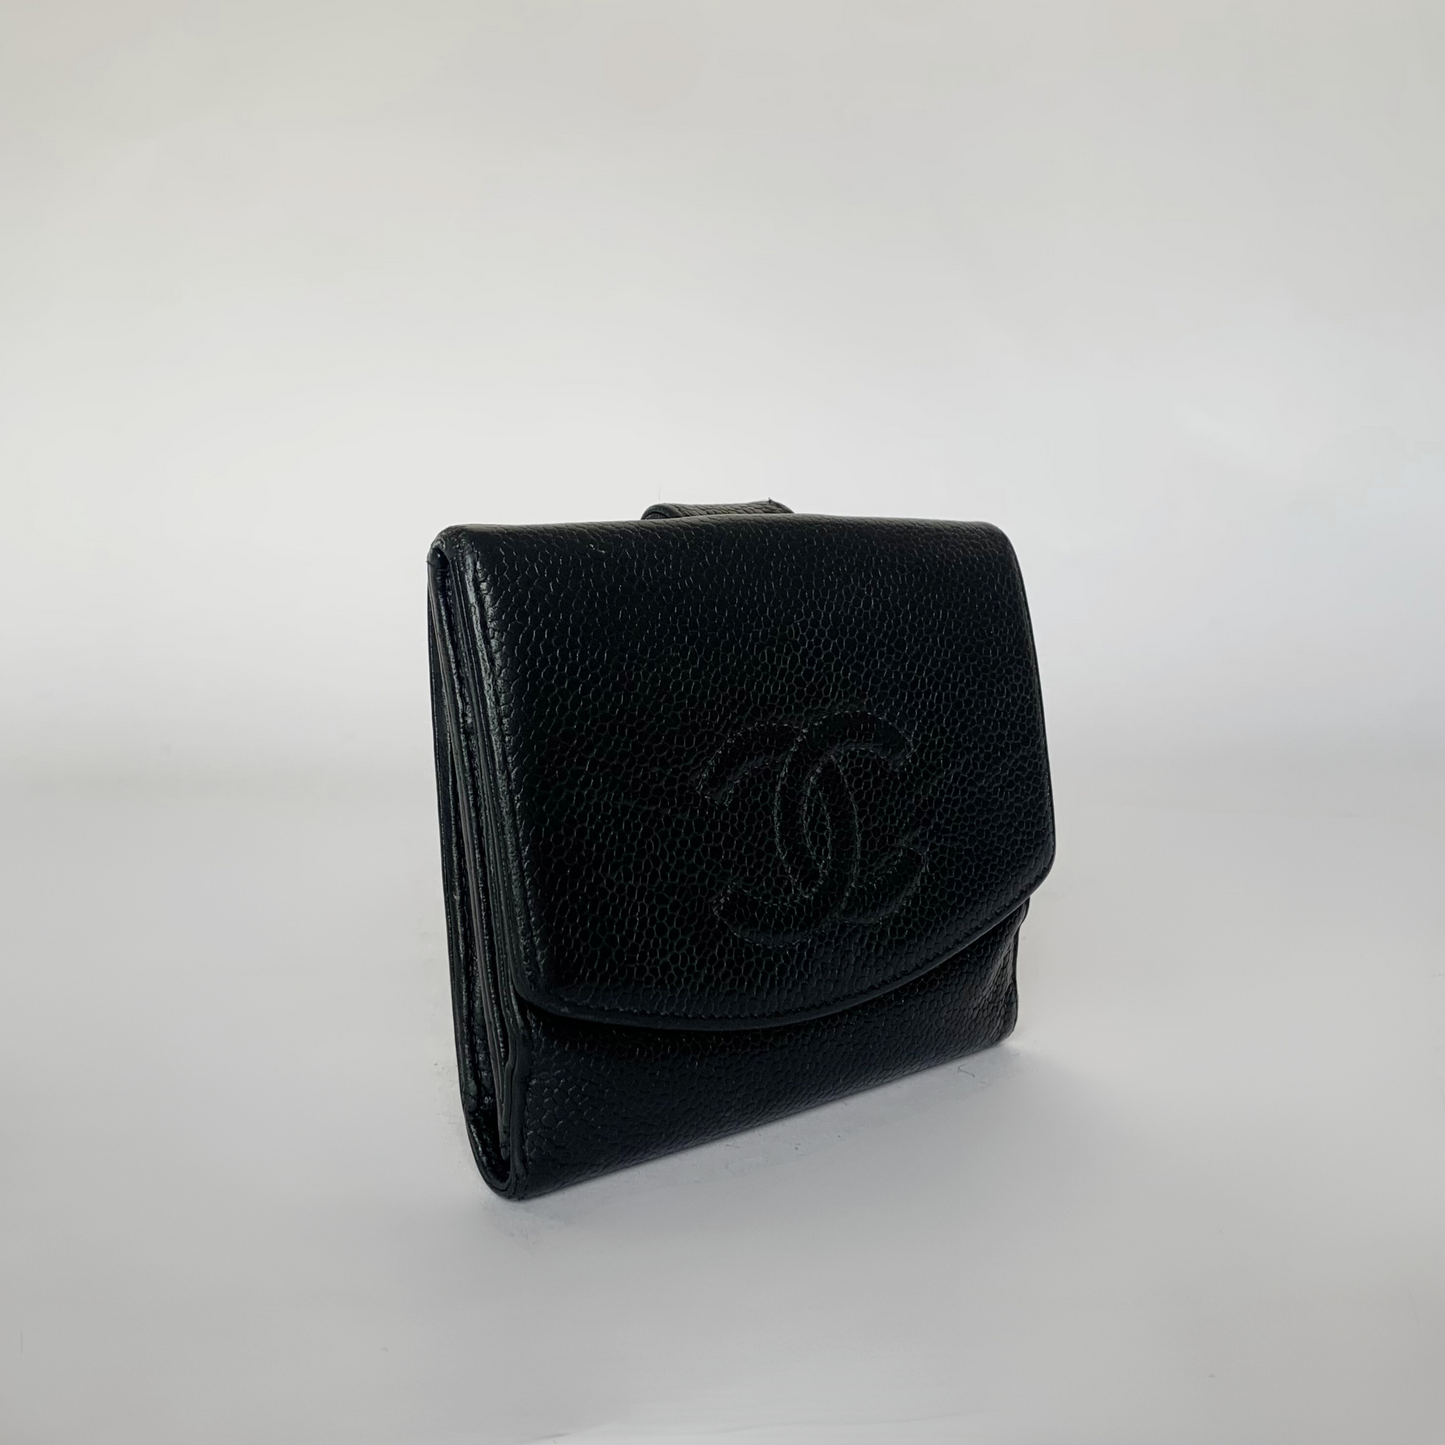 Chanel Chanel CC Wallet Small Caviar Leather - Wallets - Etoile Luxury Vintage